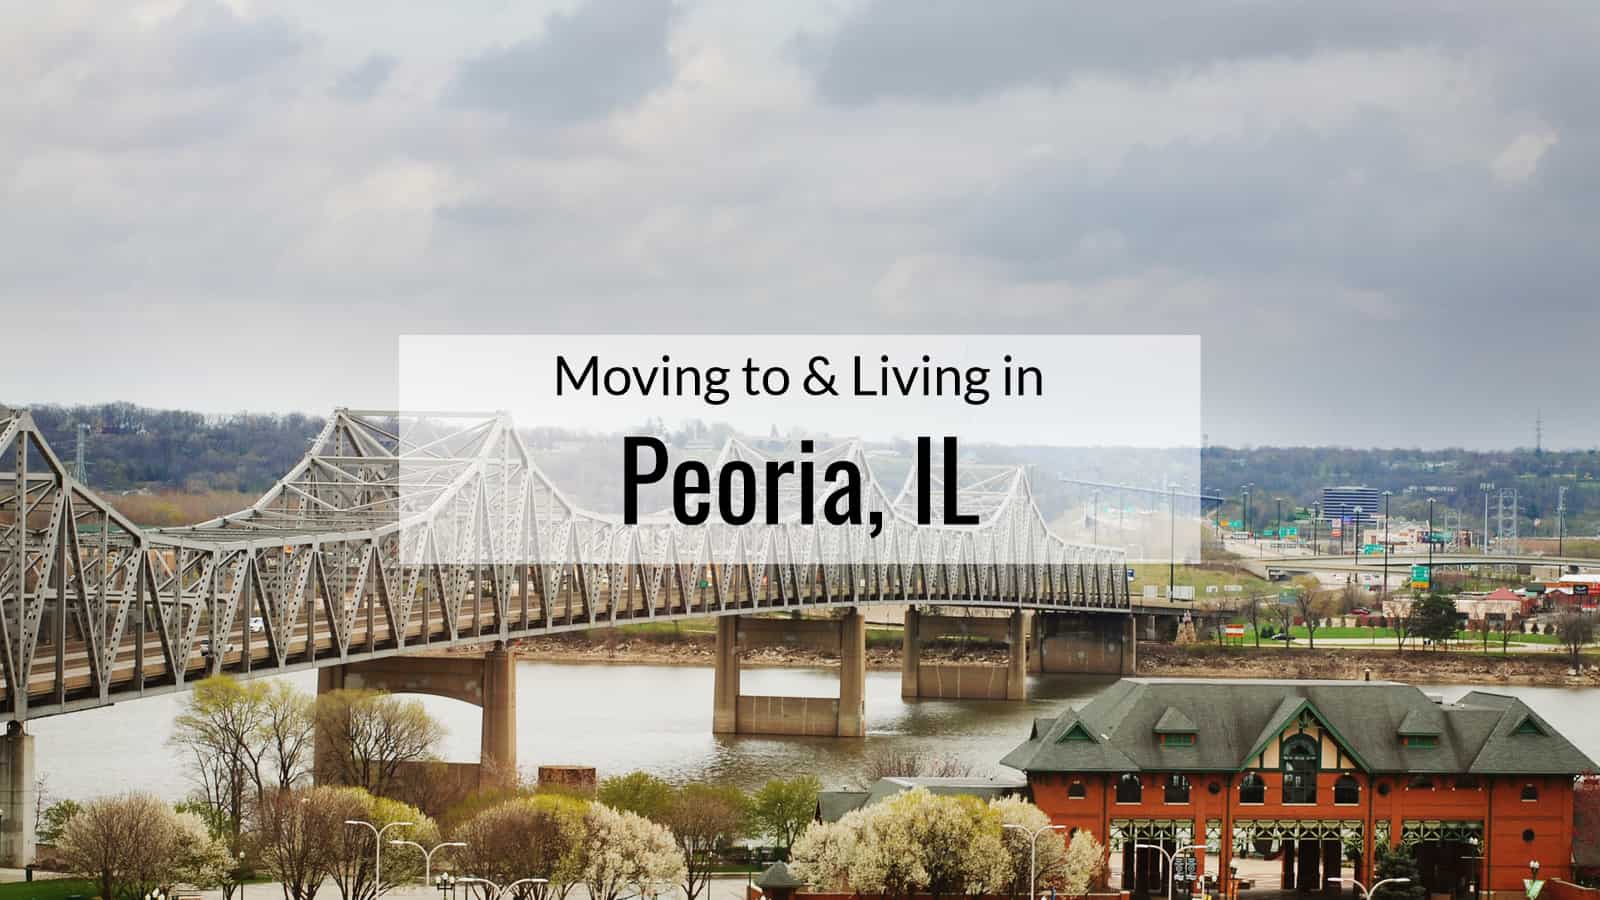 sketchy American cities  - Peoria, IL